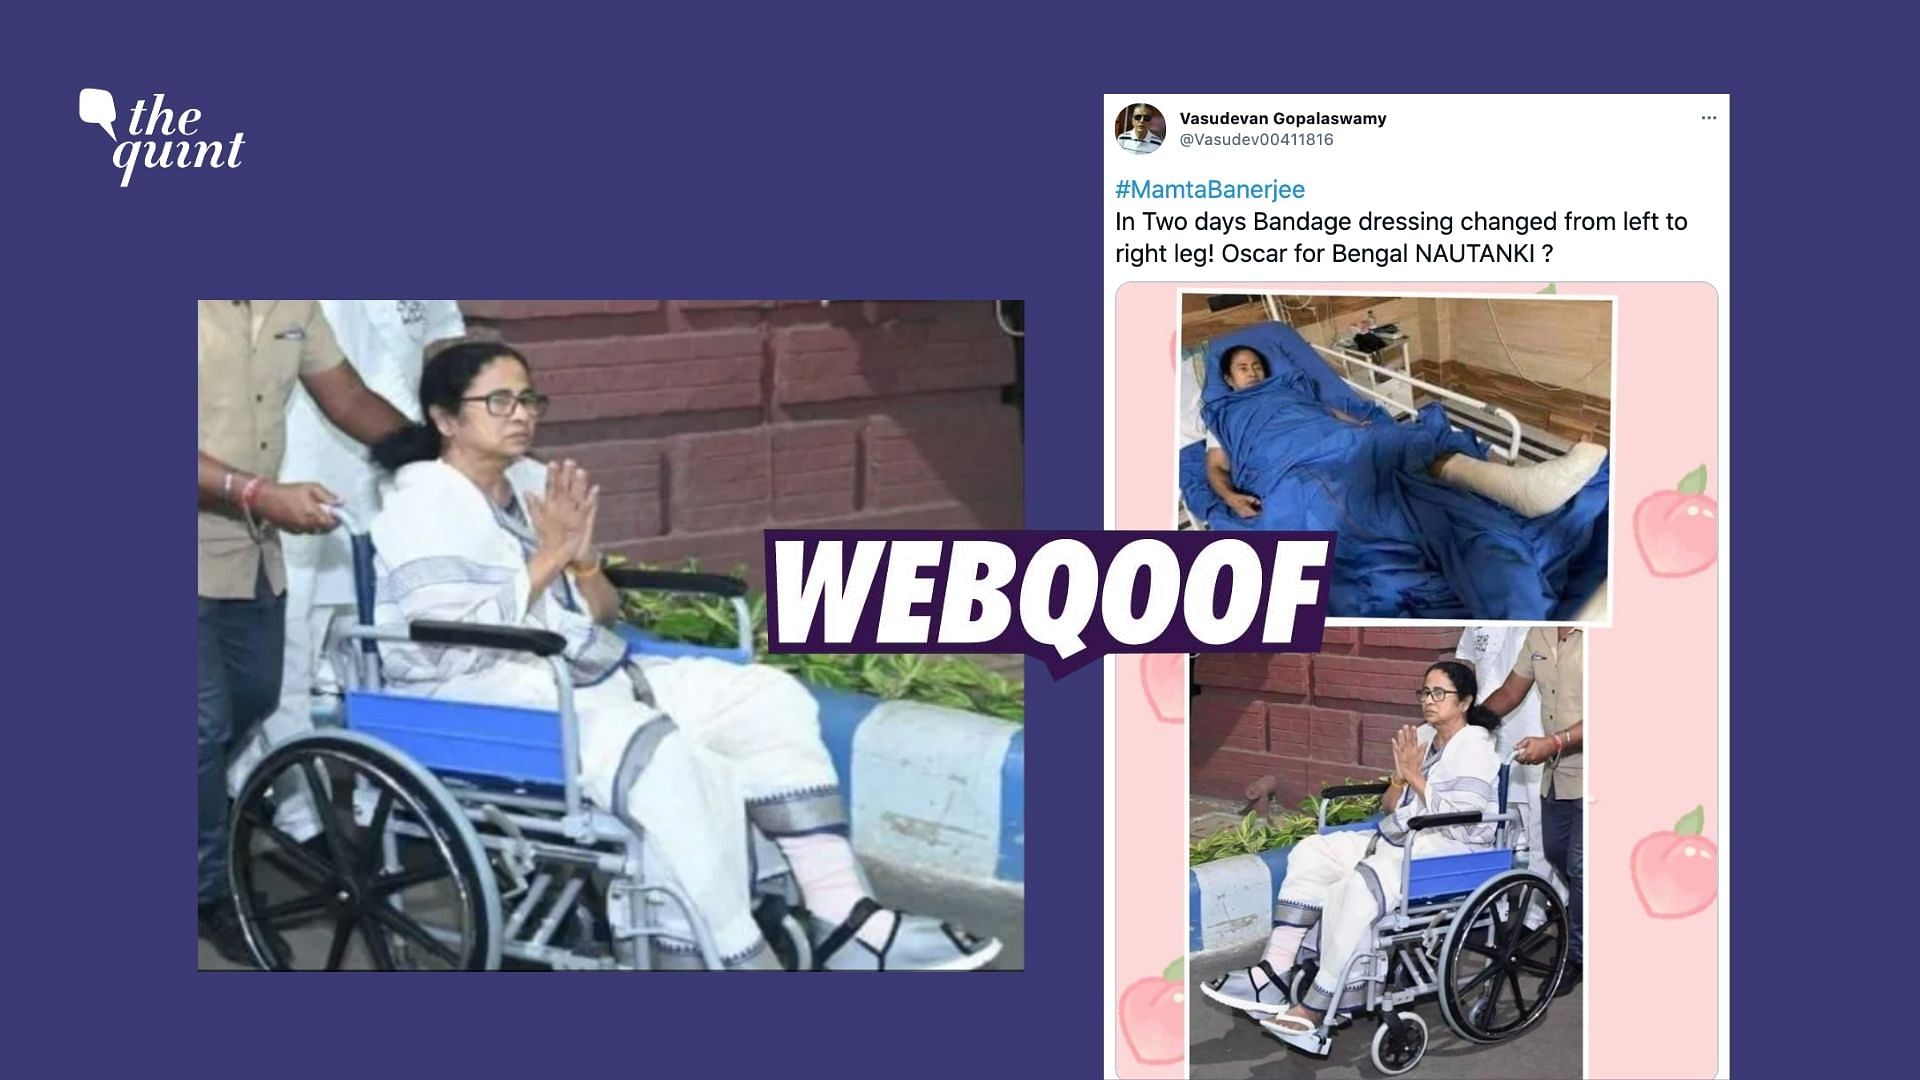 West Bengal Chief Minister Mamata Banerjee’s image in a wheelchair has been flipped to share the false claim that her injury shifted from her left leg to her right.